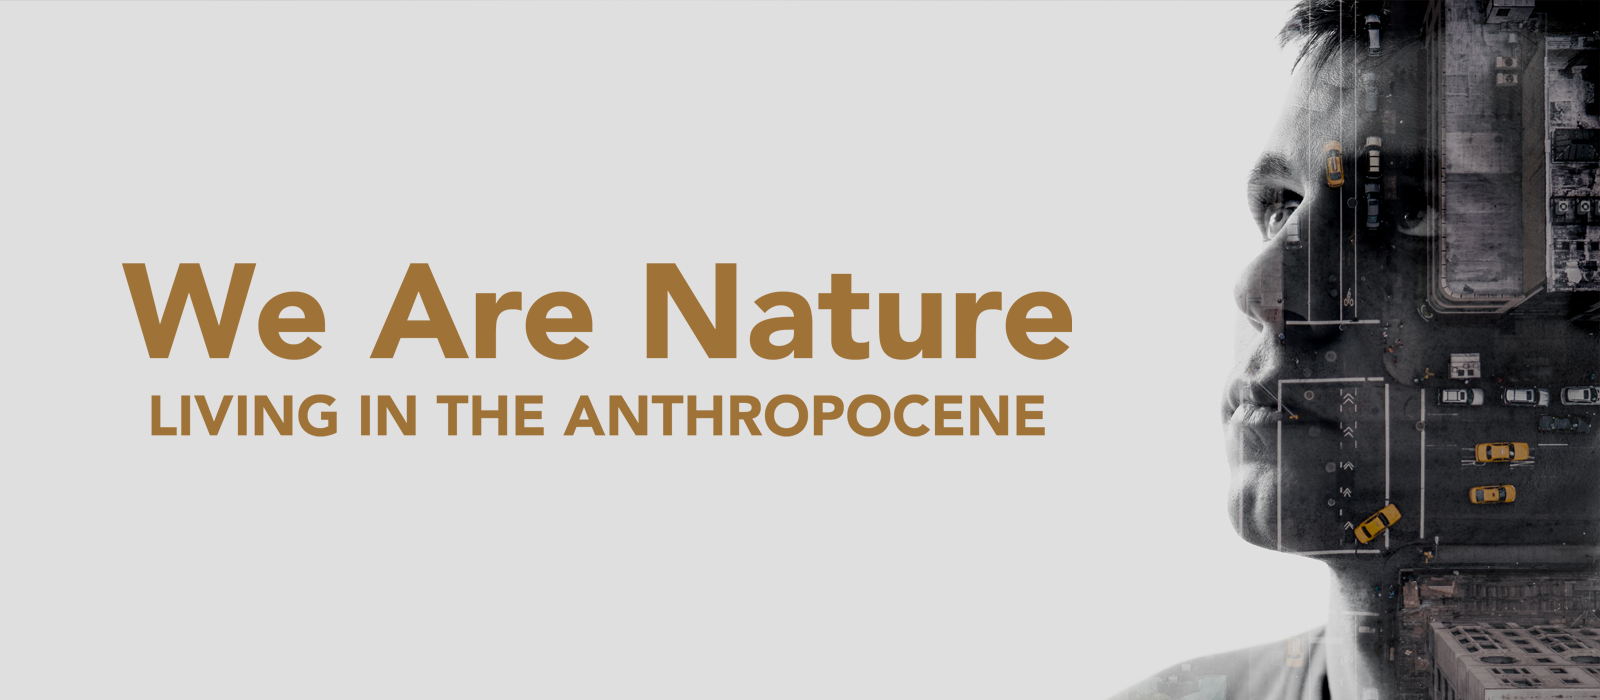 We are nature header